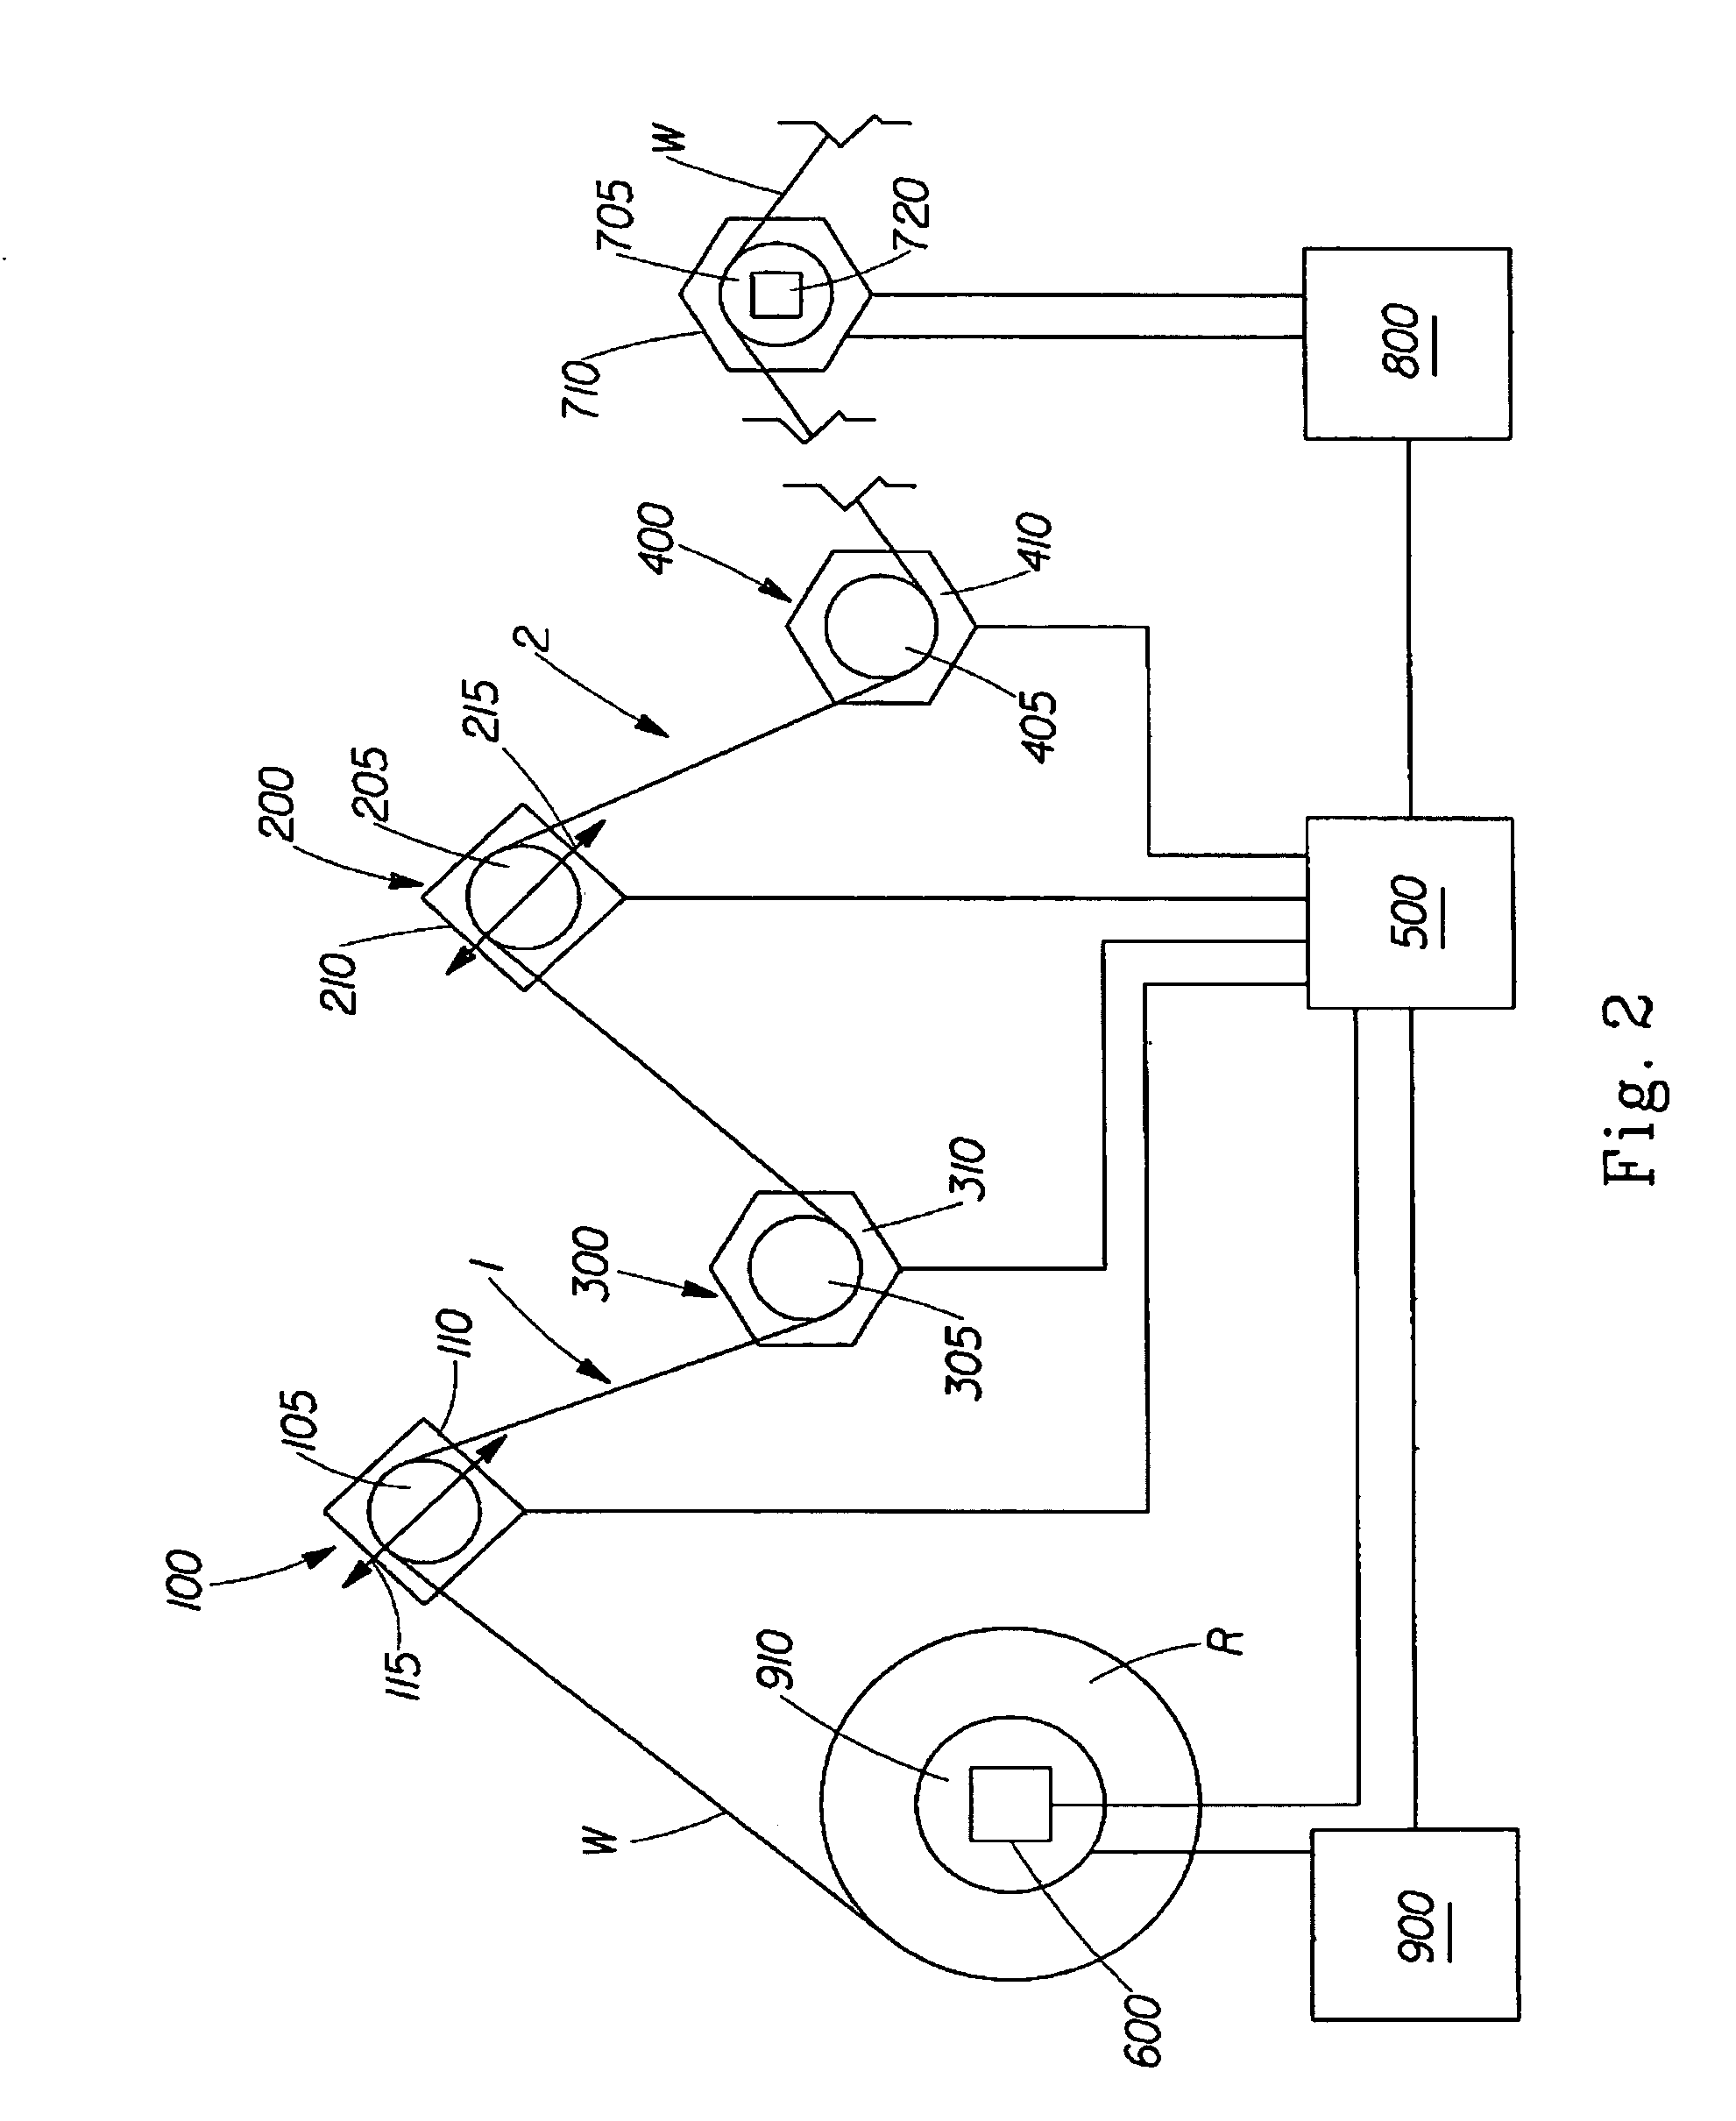 Method of controlling tension in a moving web material